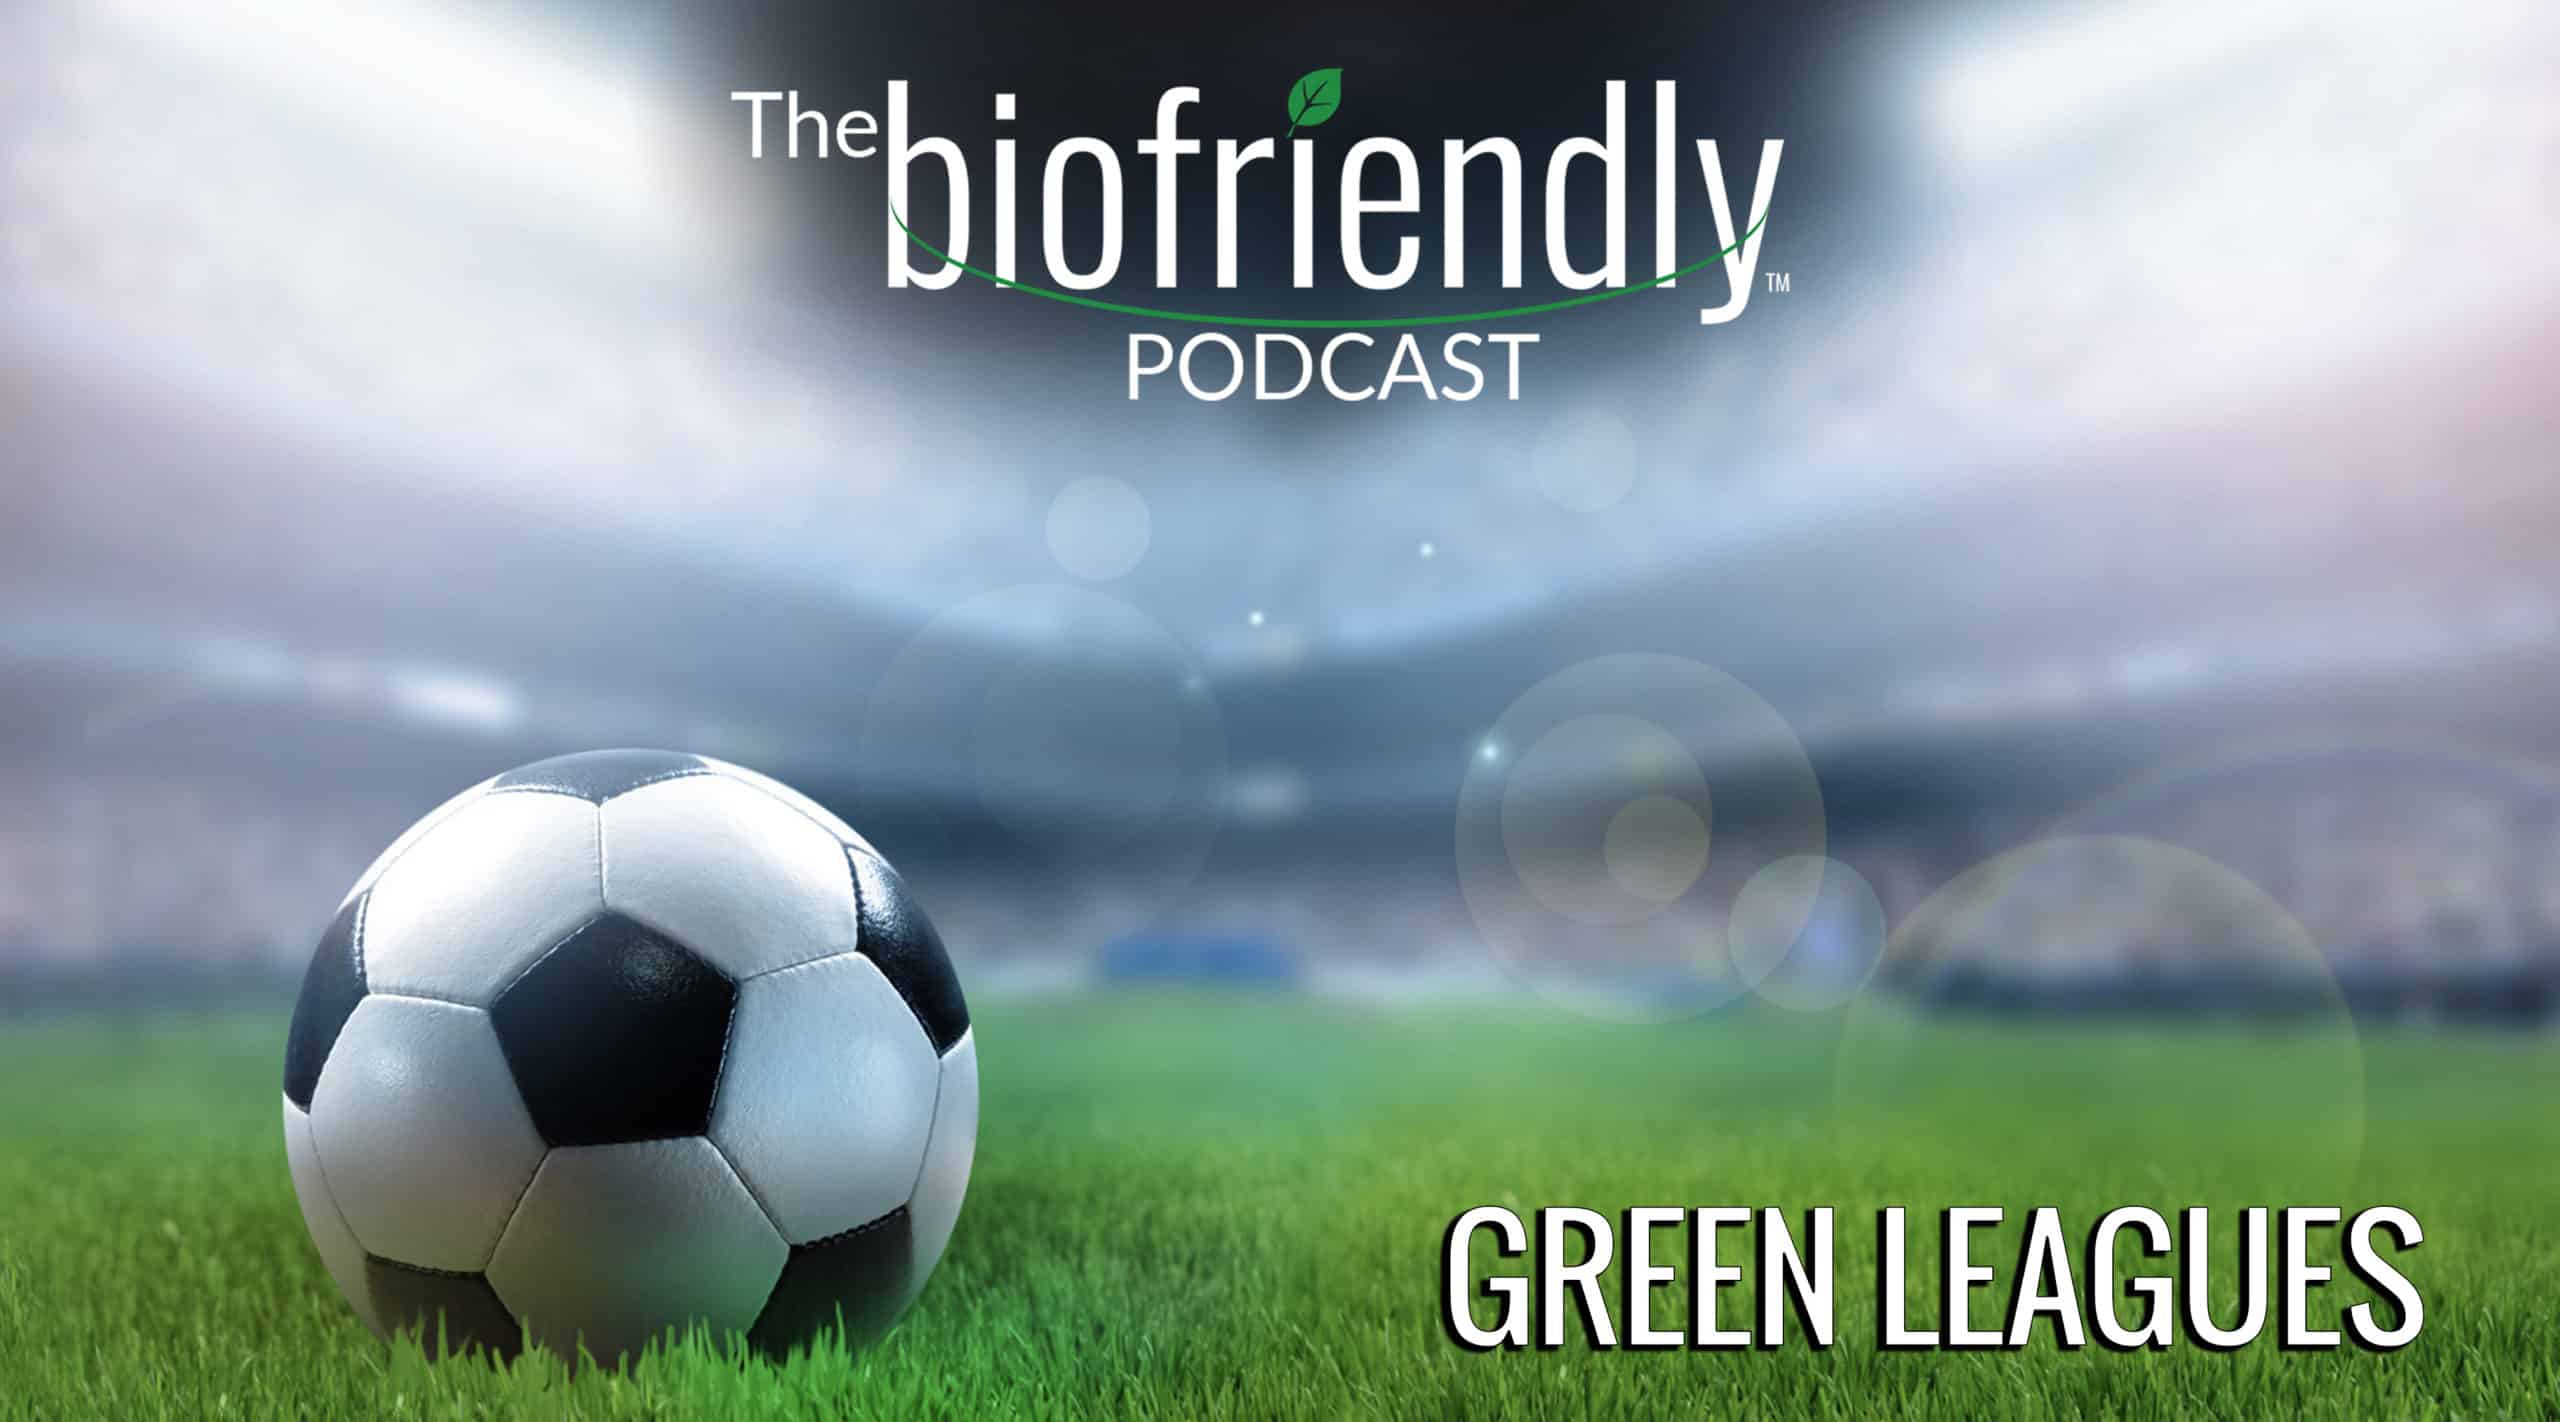 The Biofriendly Podcast - Episode 22 - Green Leagues